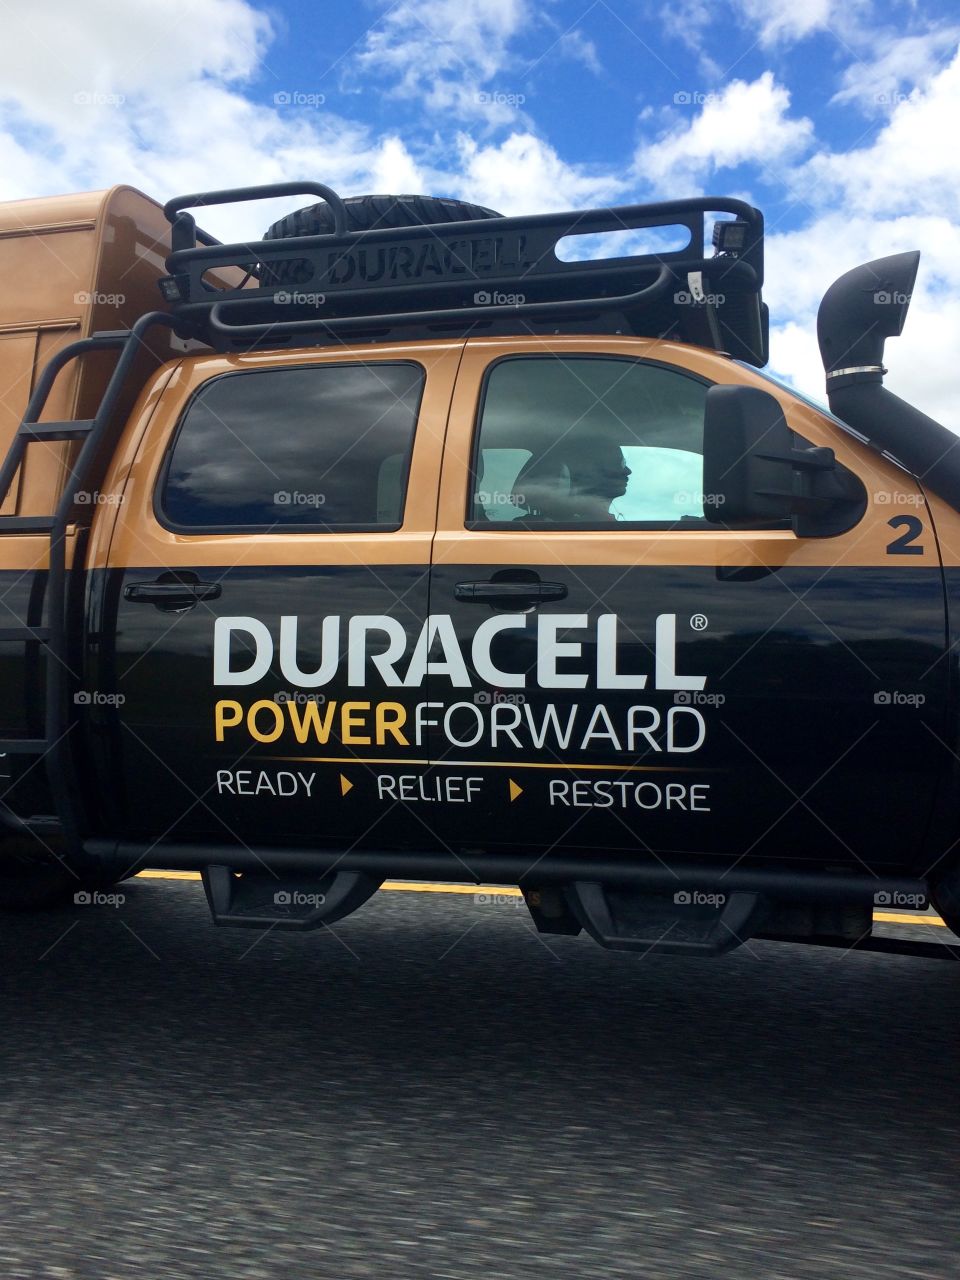 Duracell powered 